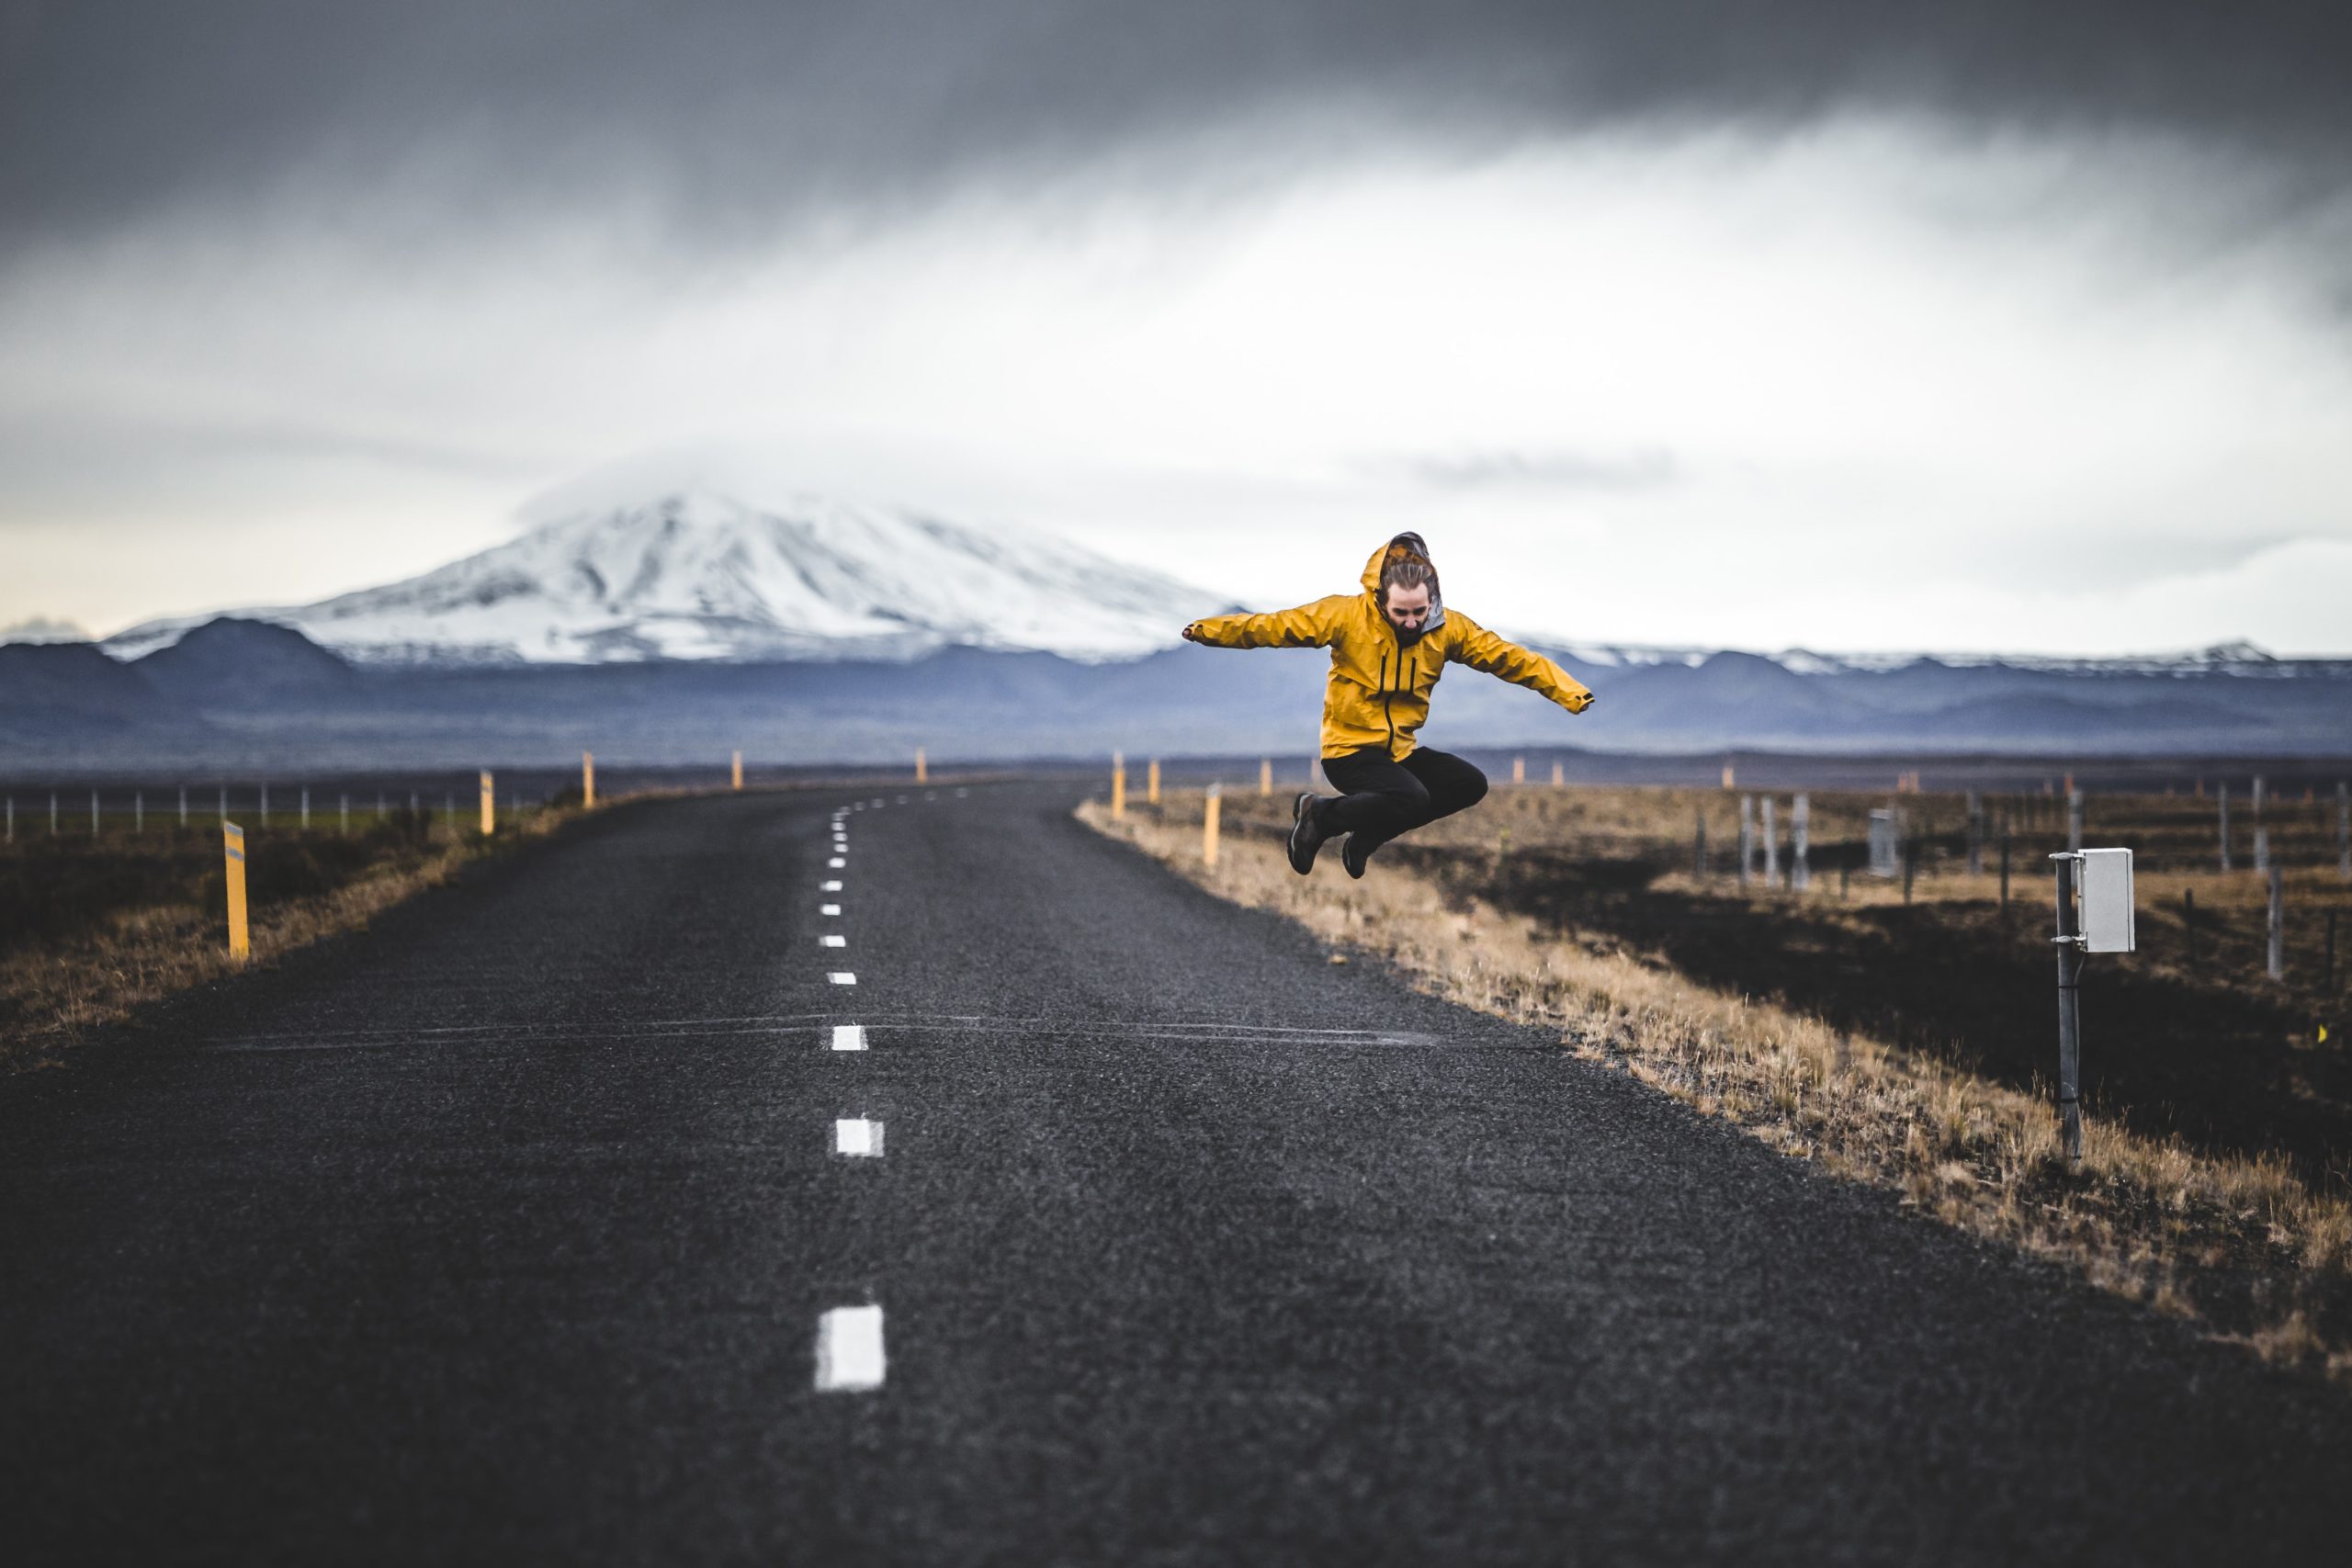 A man jumps on a road in Iceland